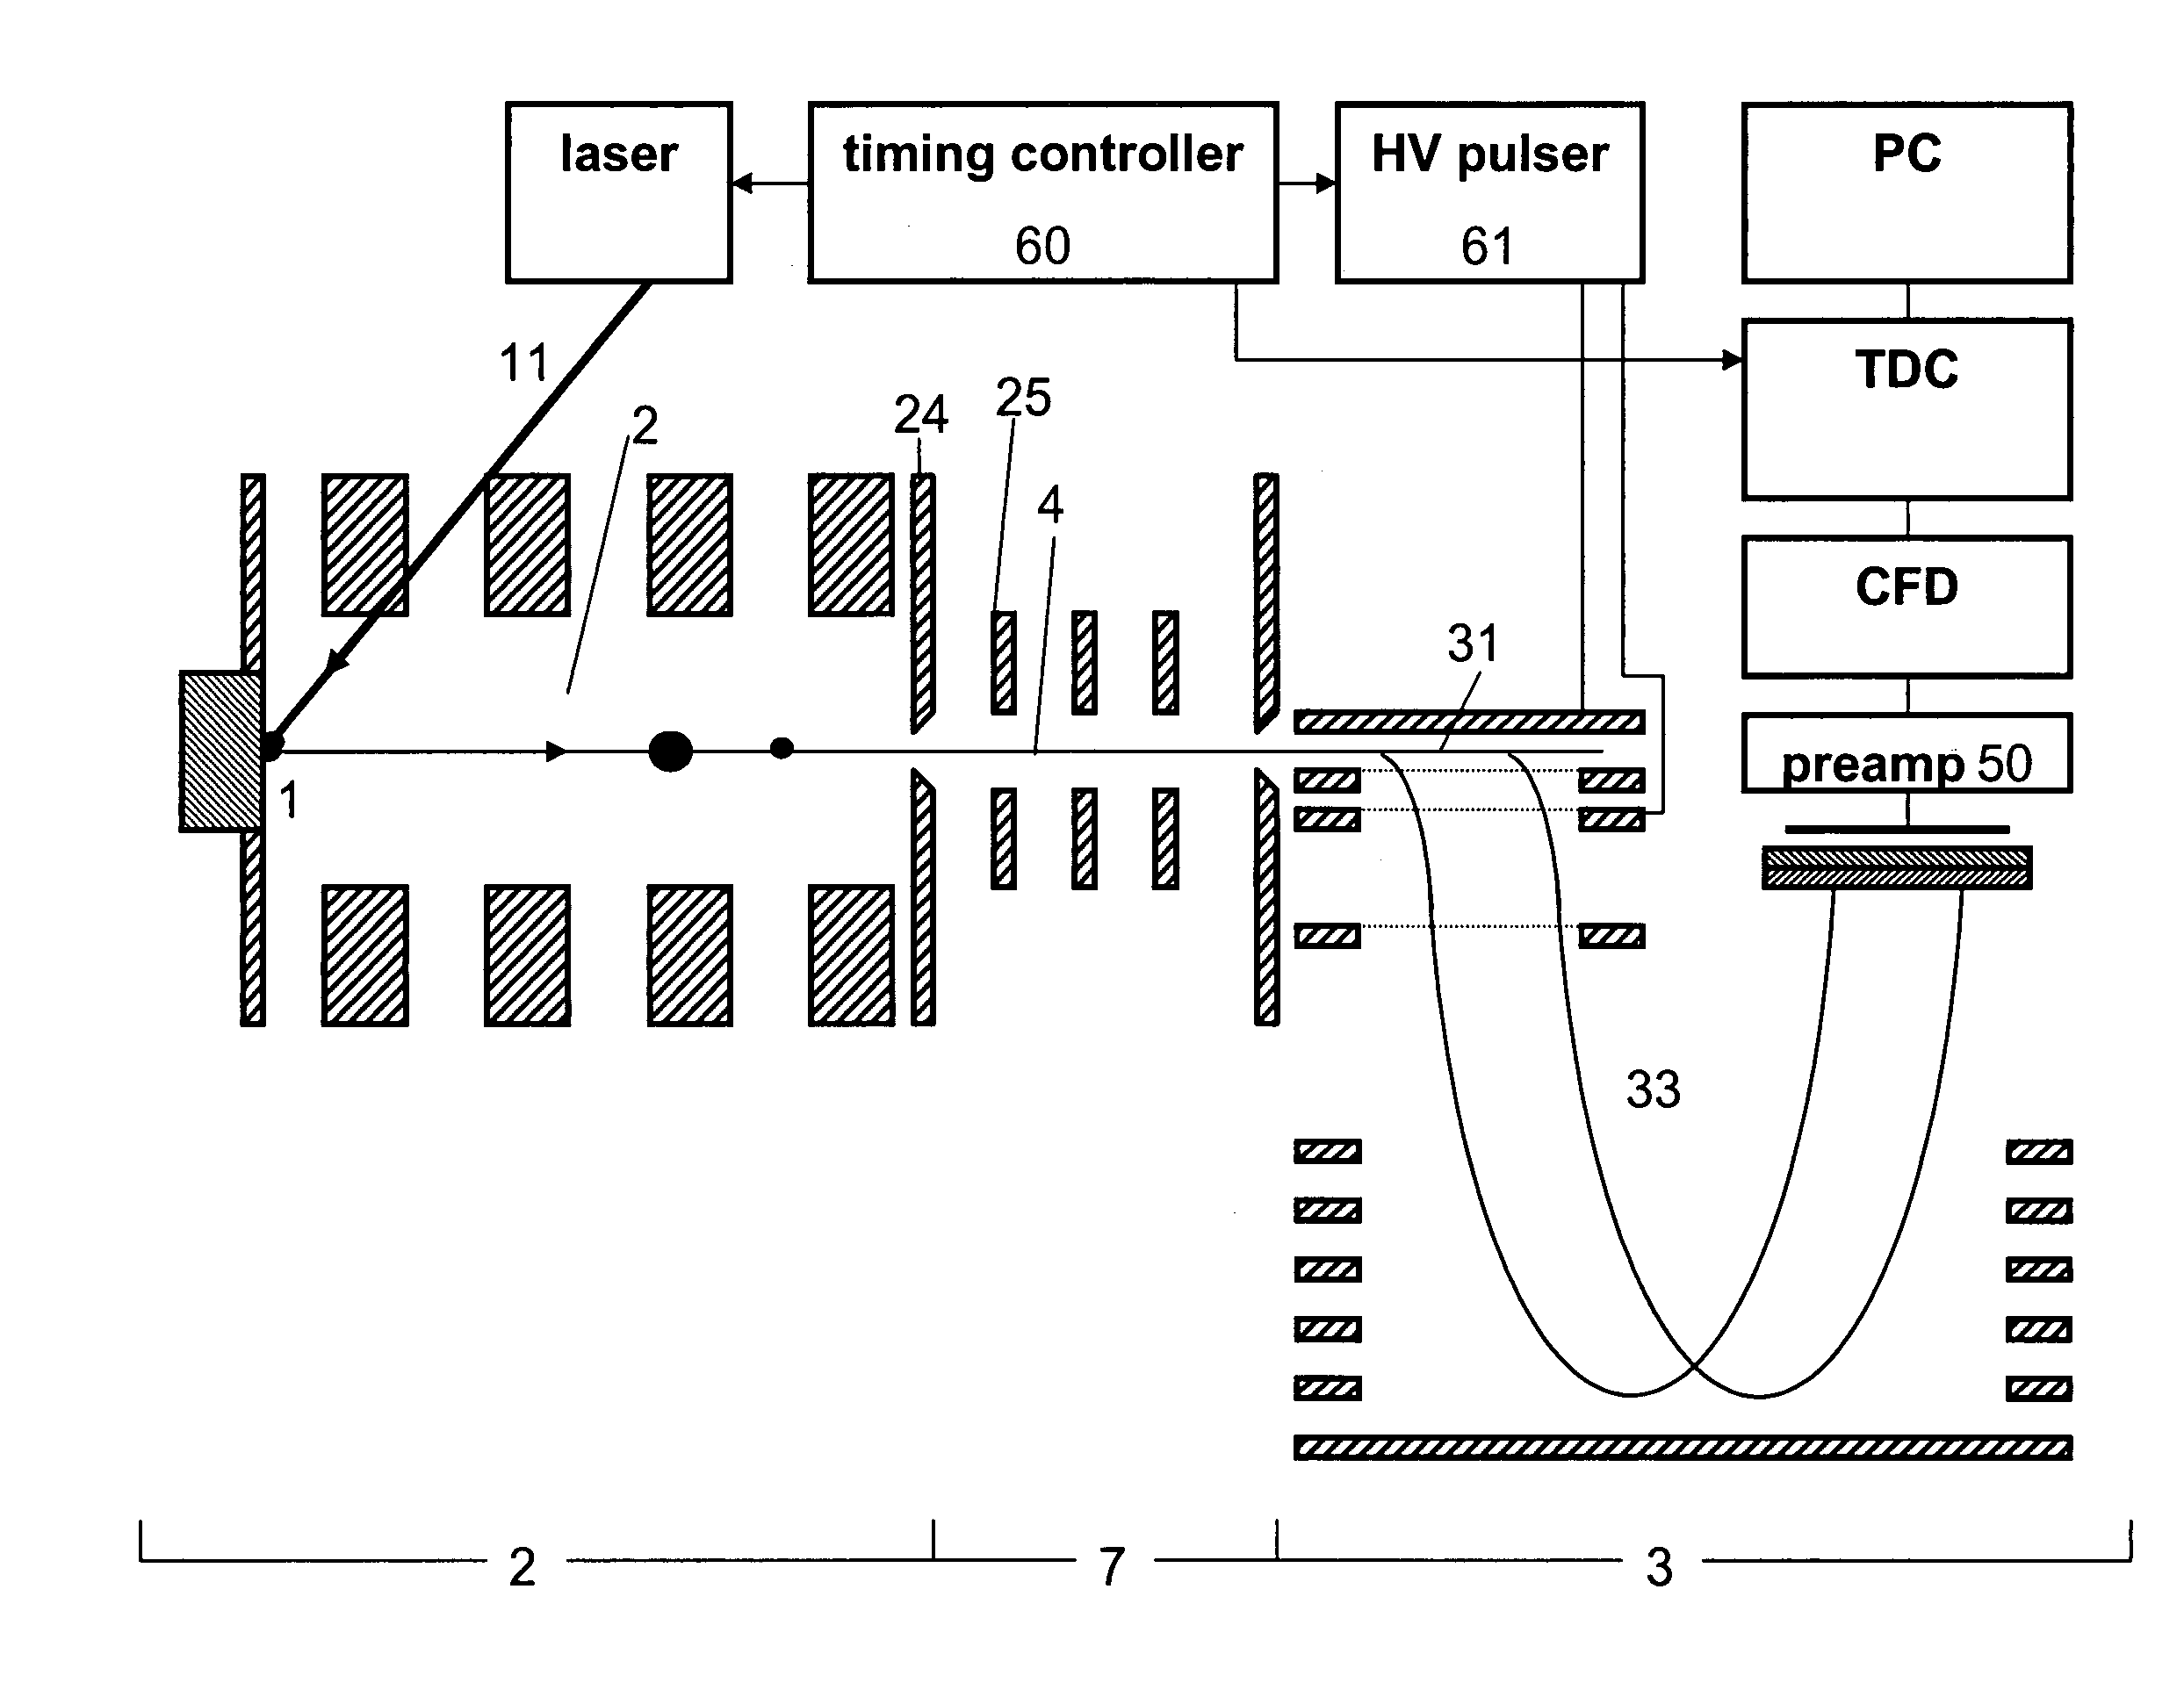 Time-of-flight mass spectrometer for monitoring of fast processes